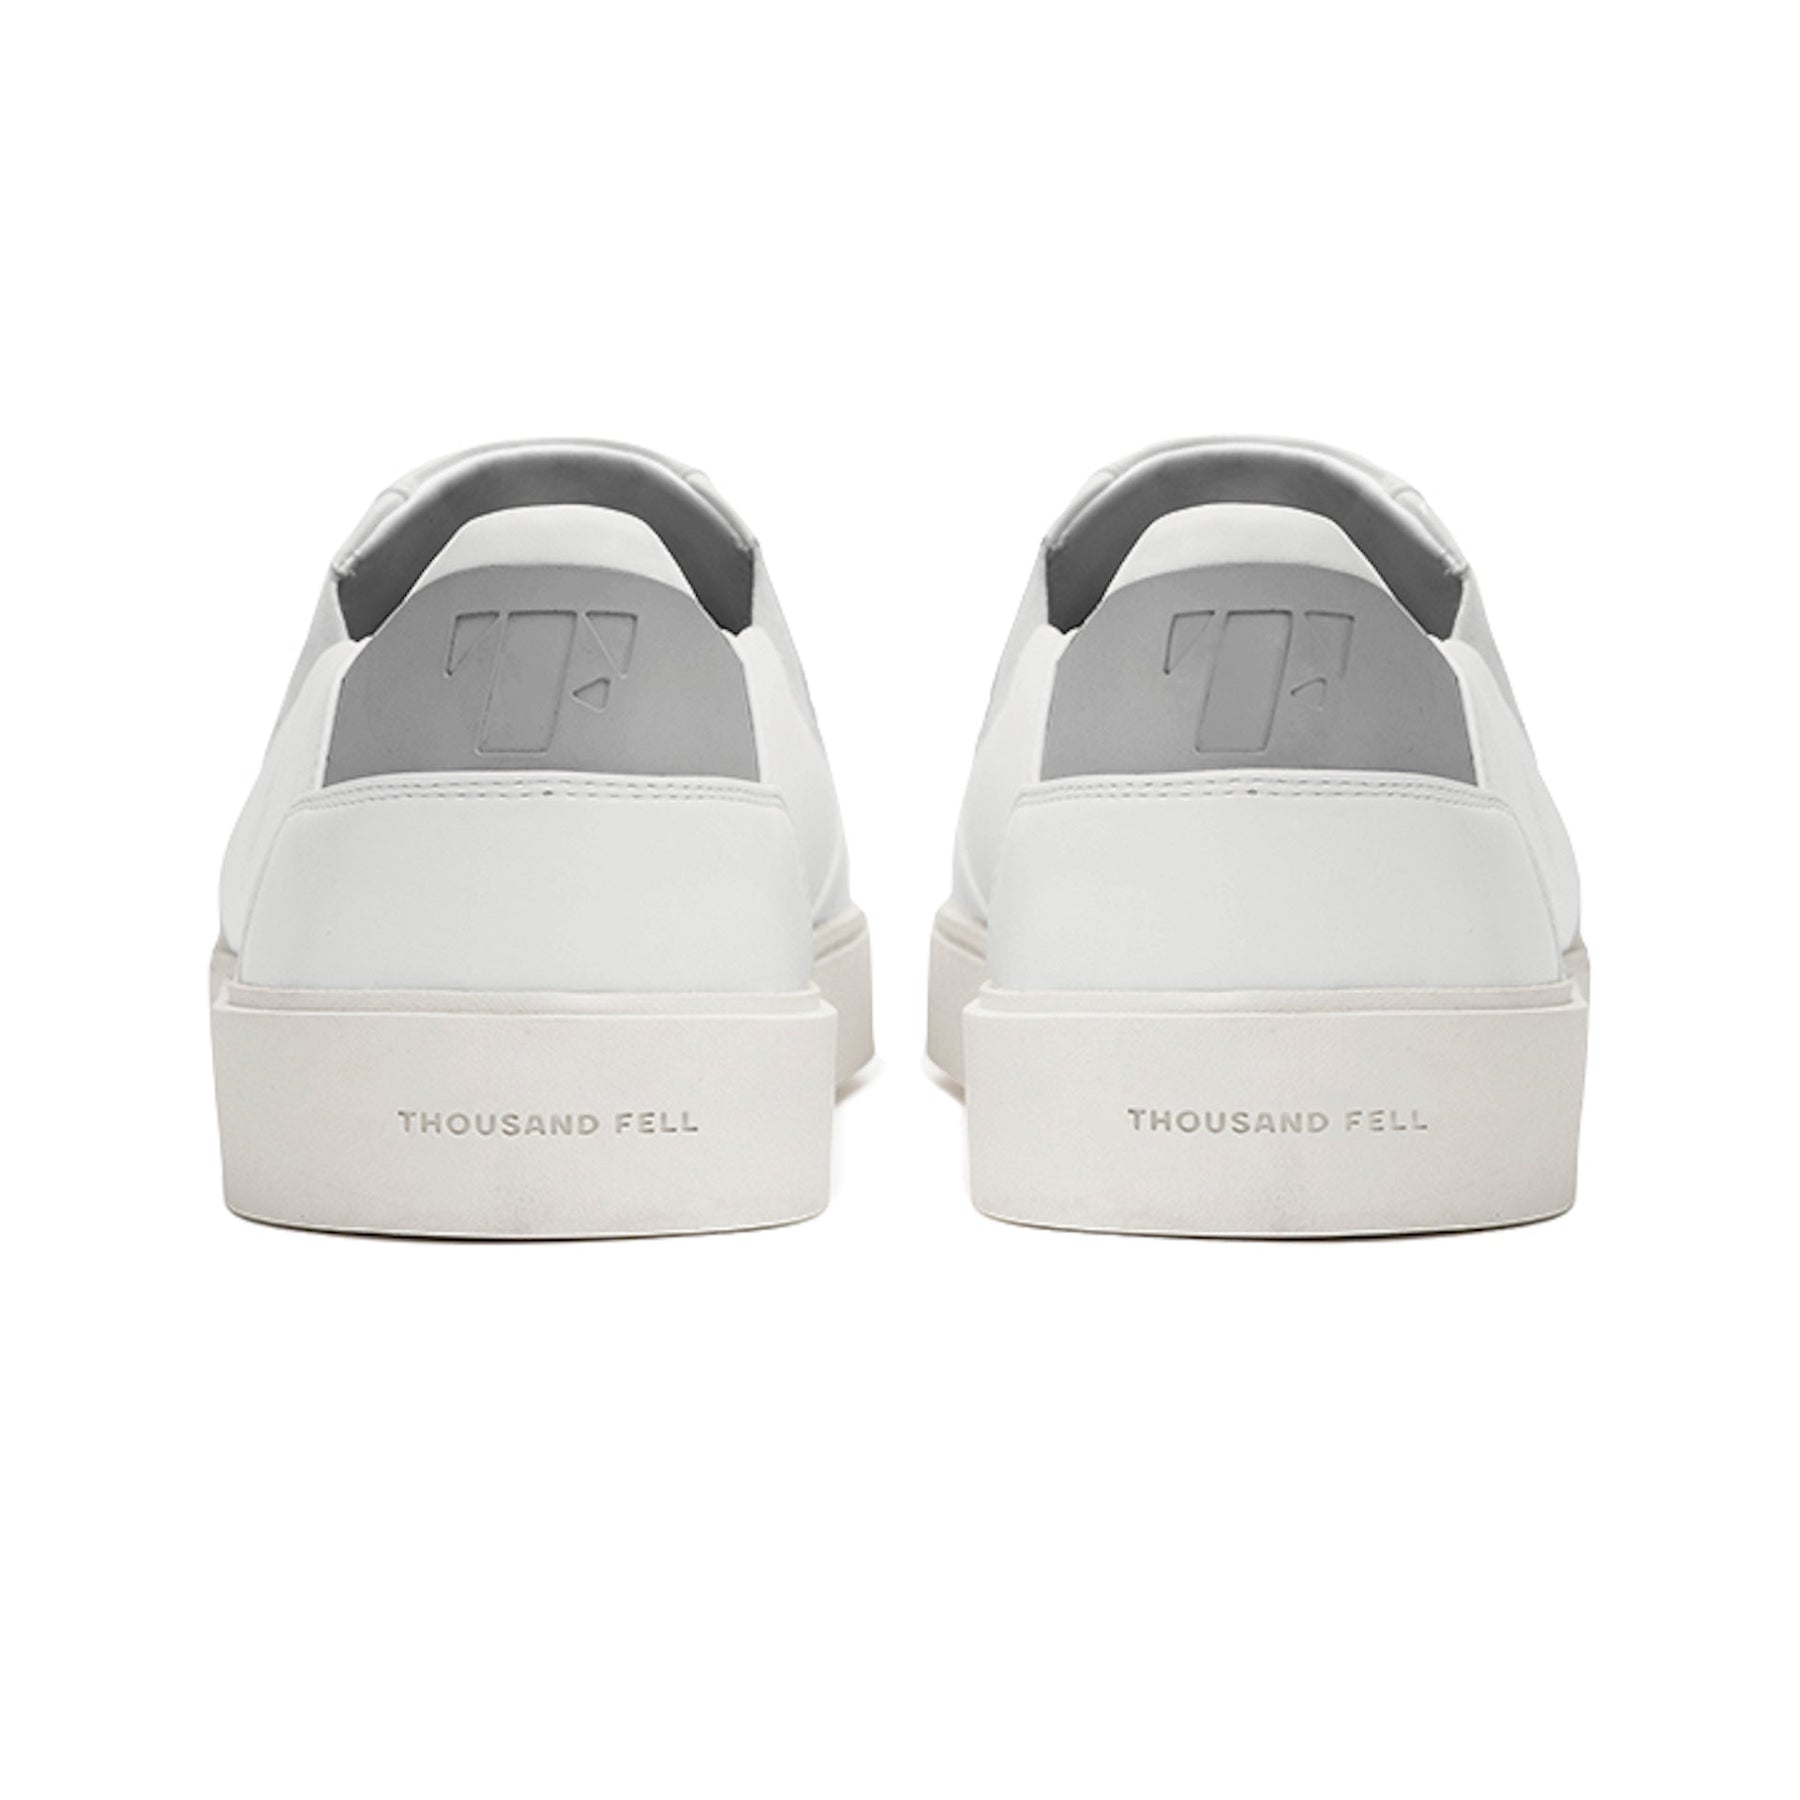 back view of white slip ons with grey upper heel